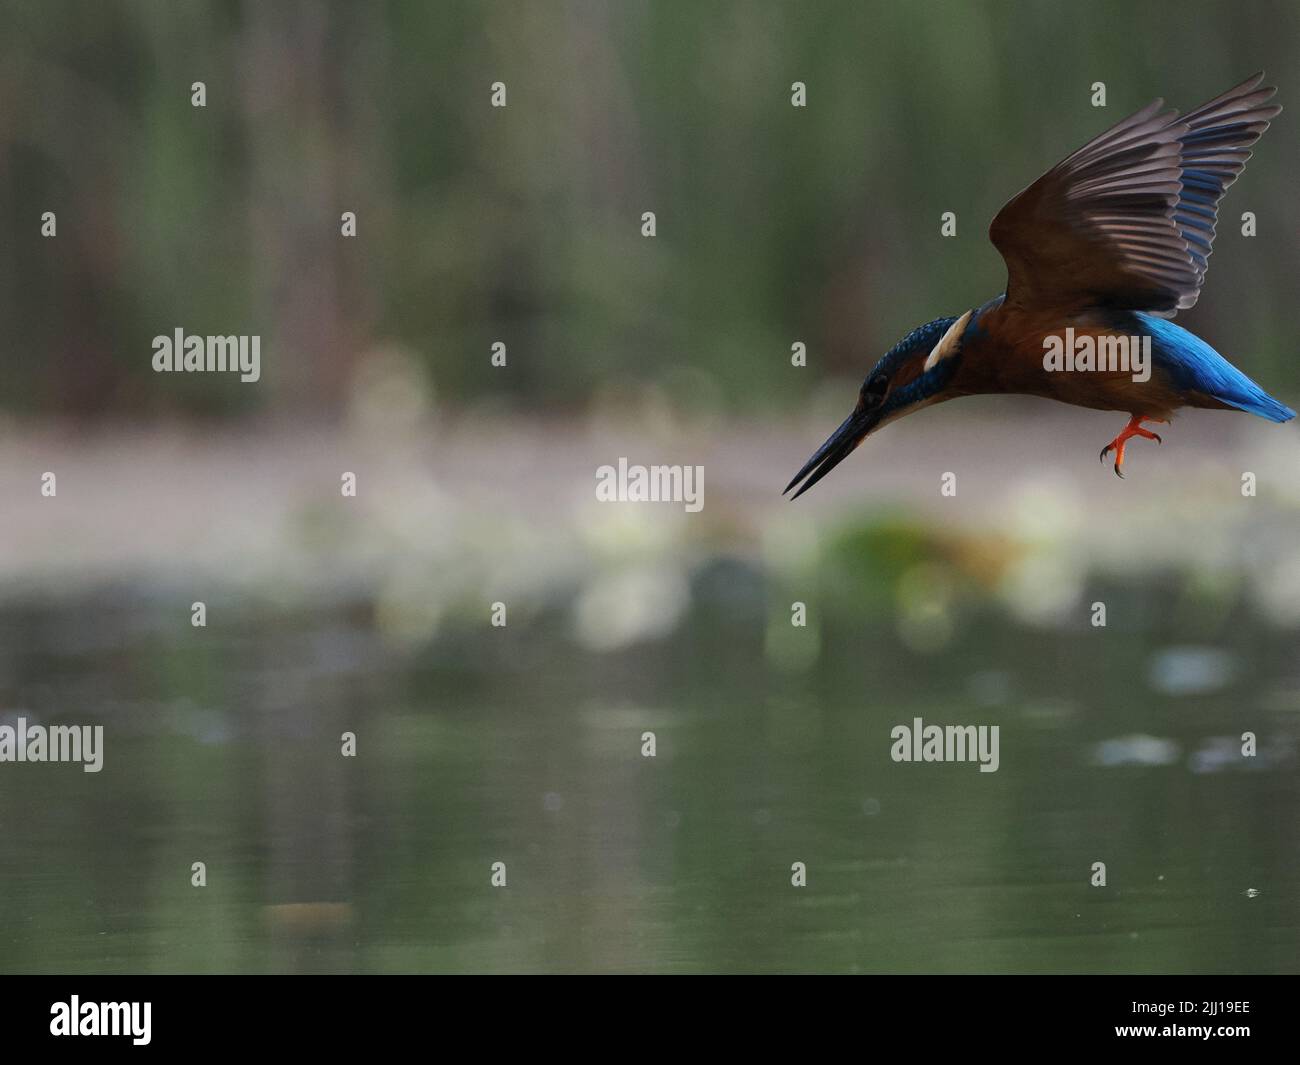 The kingfisher prepares for the catch. UK: THESE BEAUTIFUL images mark a momentous occasion for this blind photographer as he finally achieves his dre Stock Photo